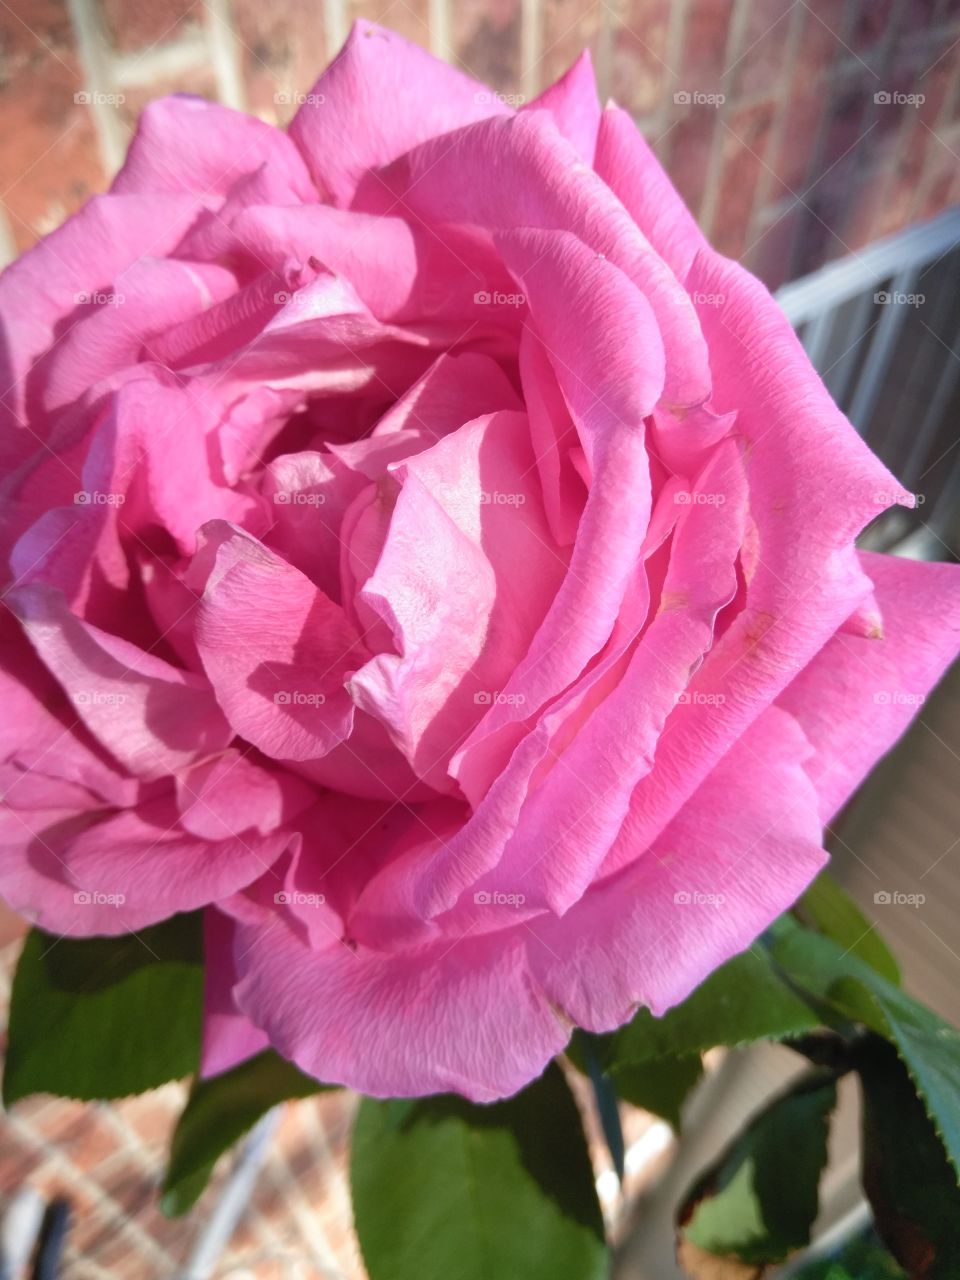 Fully open pink hybrid rose bloom on a early morning.